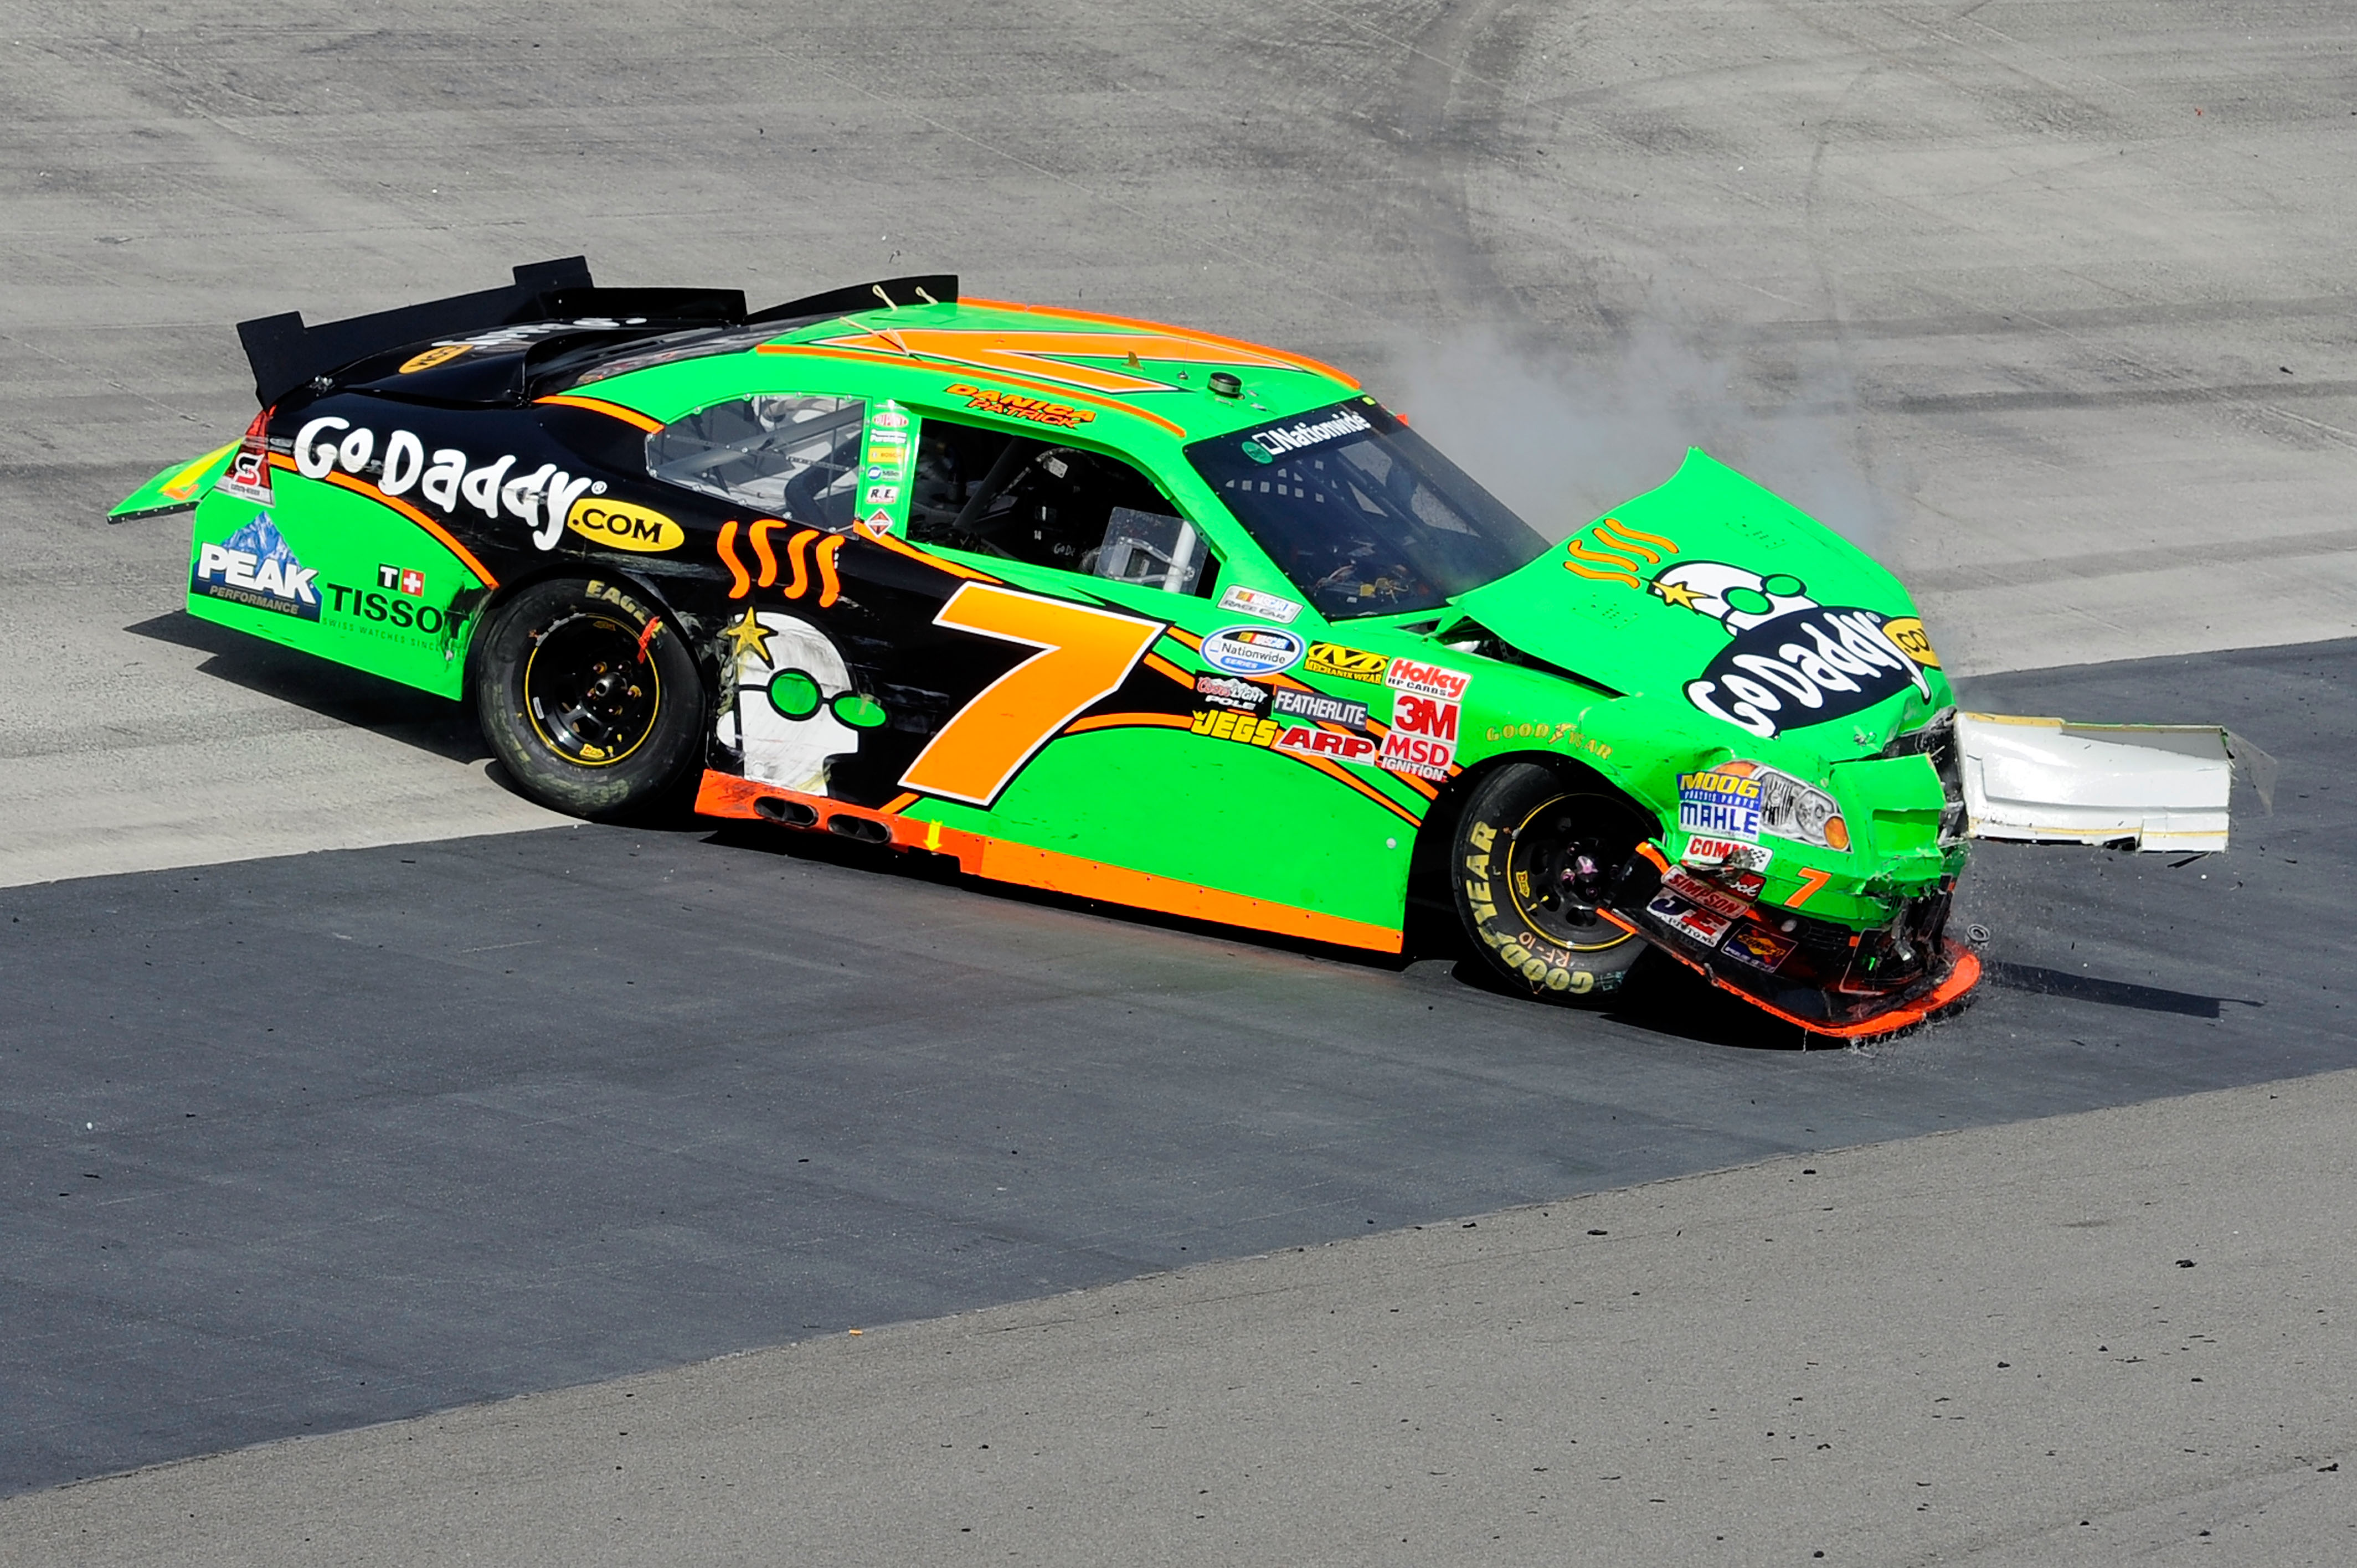 Danica ended her day on the hook in her last short track race.